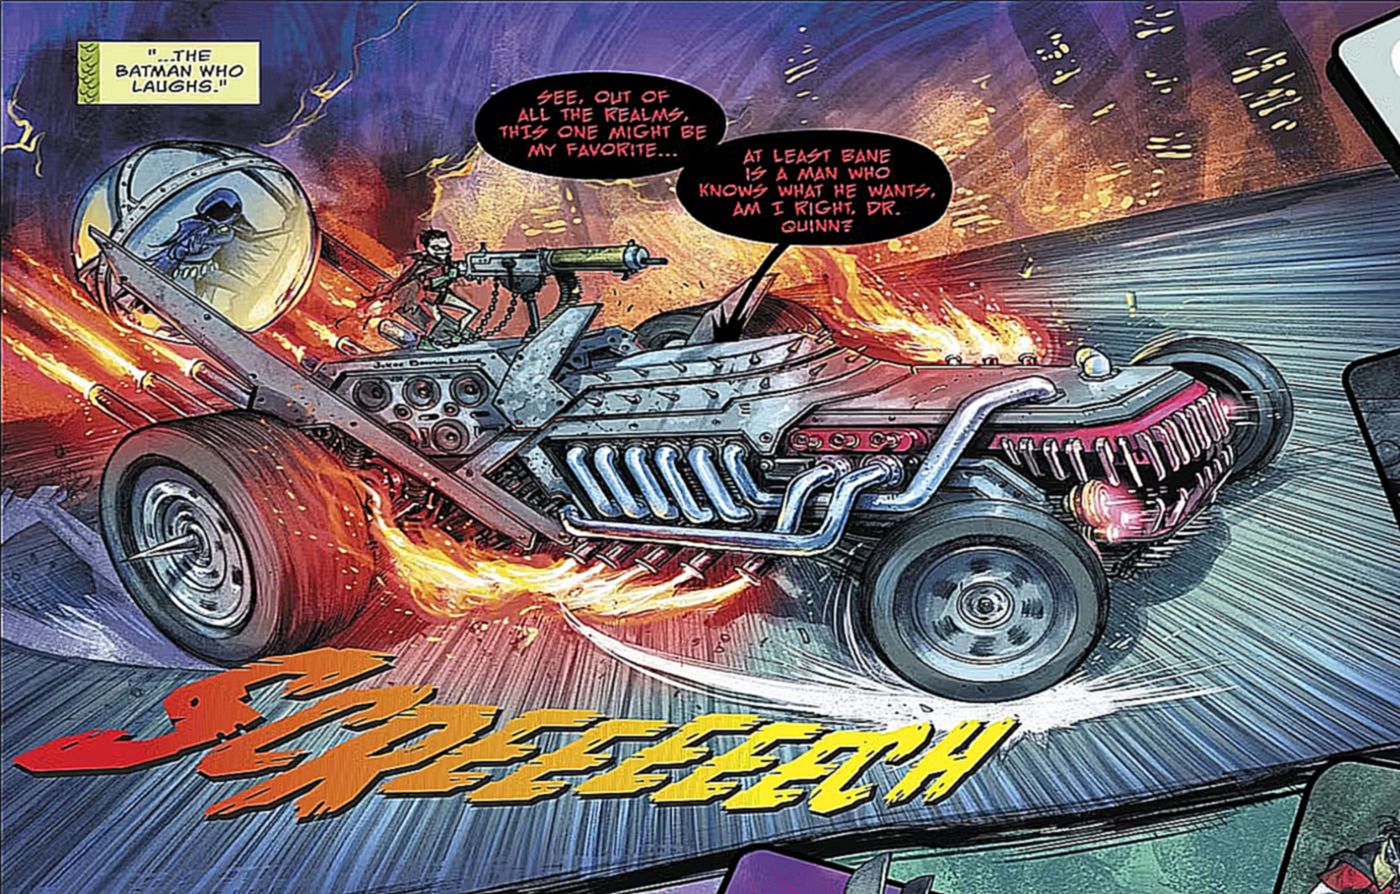 Green Arrow #32, the Batman Who Laughs screeches into frame driving his Batmobile That Laughs